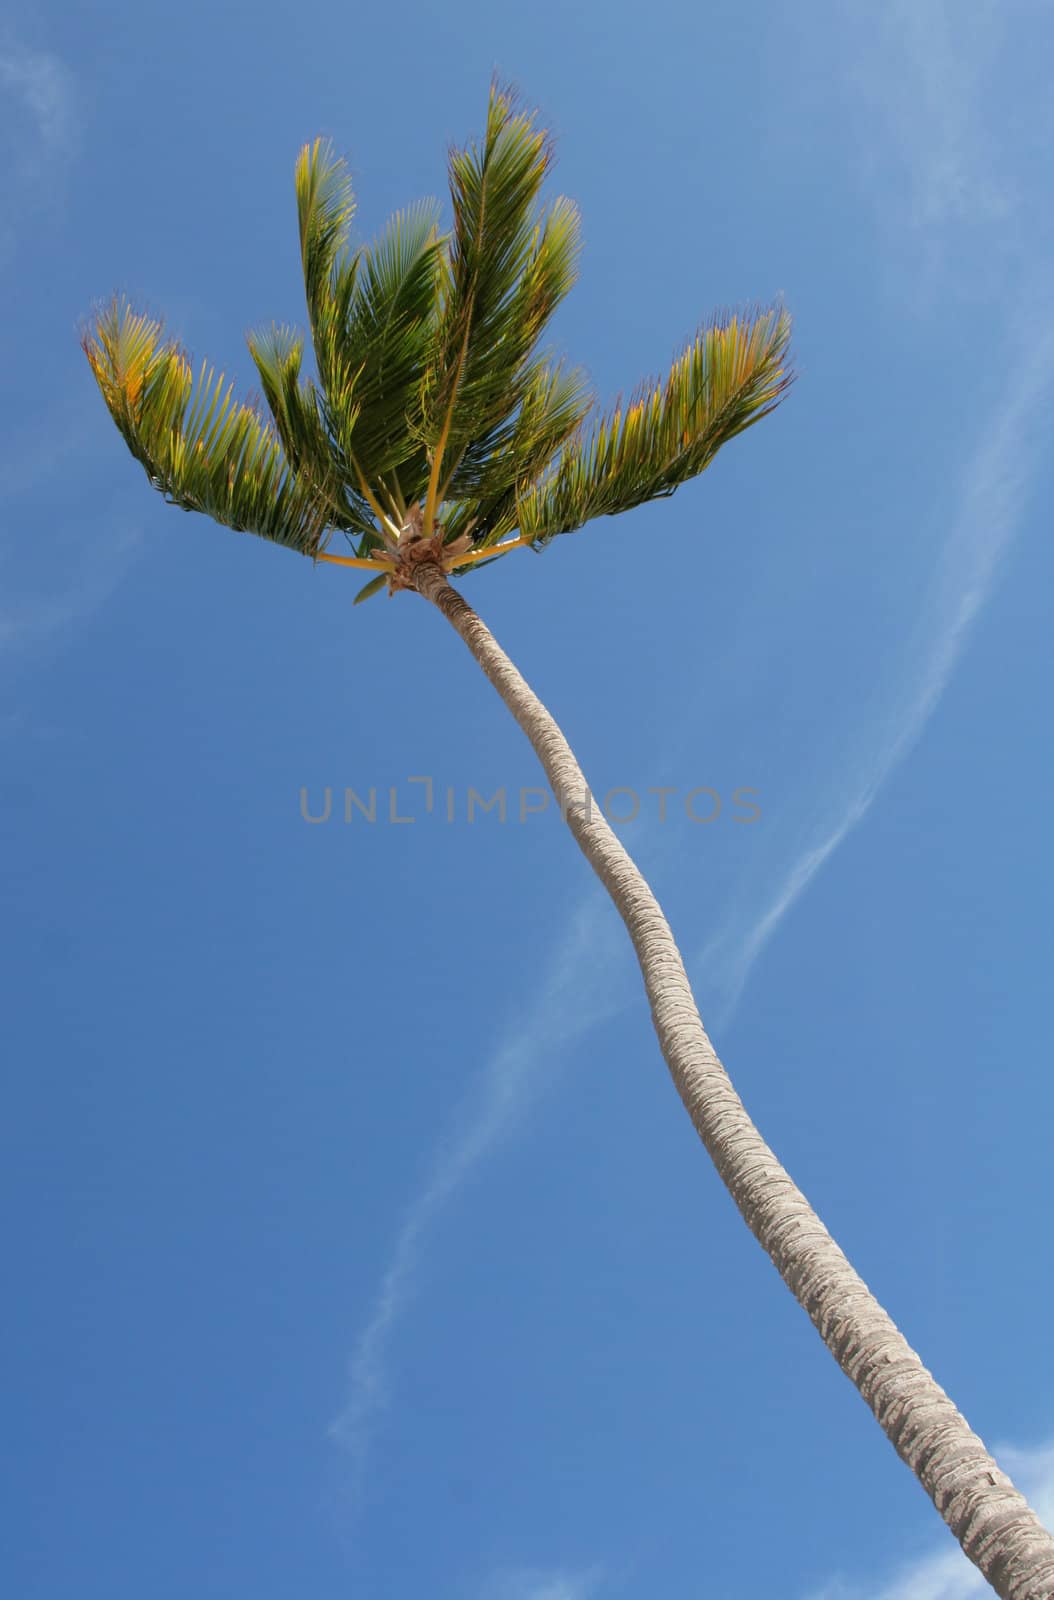 A single tropical palm tree shot looking up at it, against a blue sky.